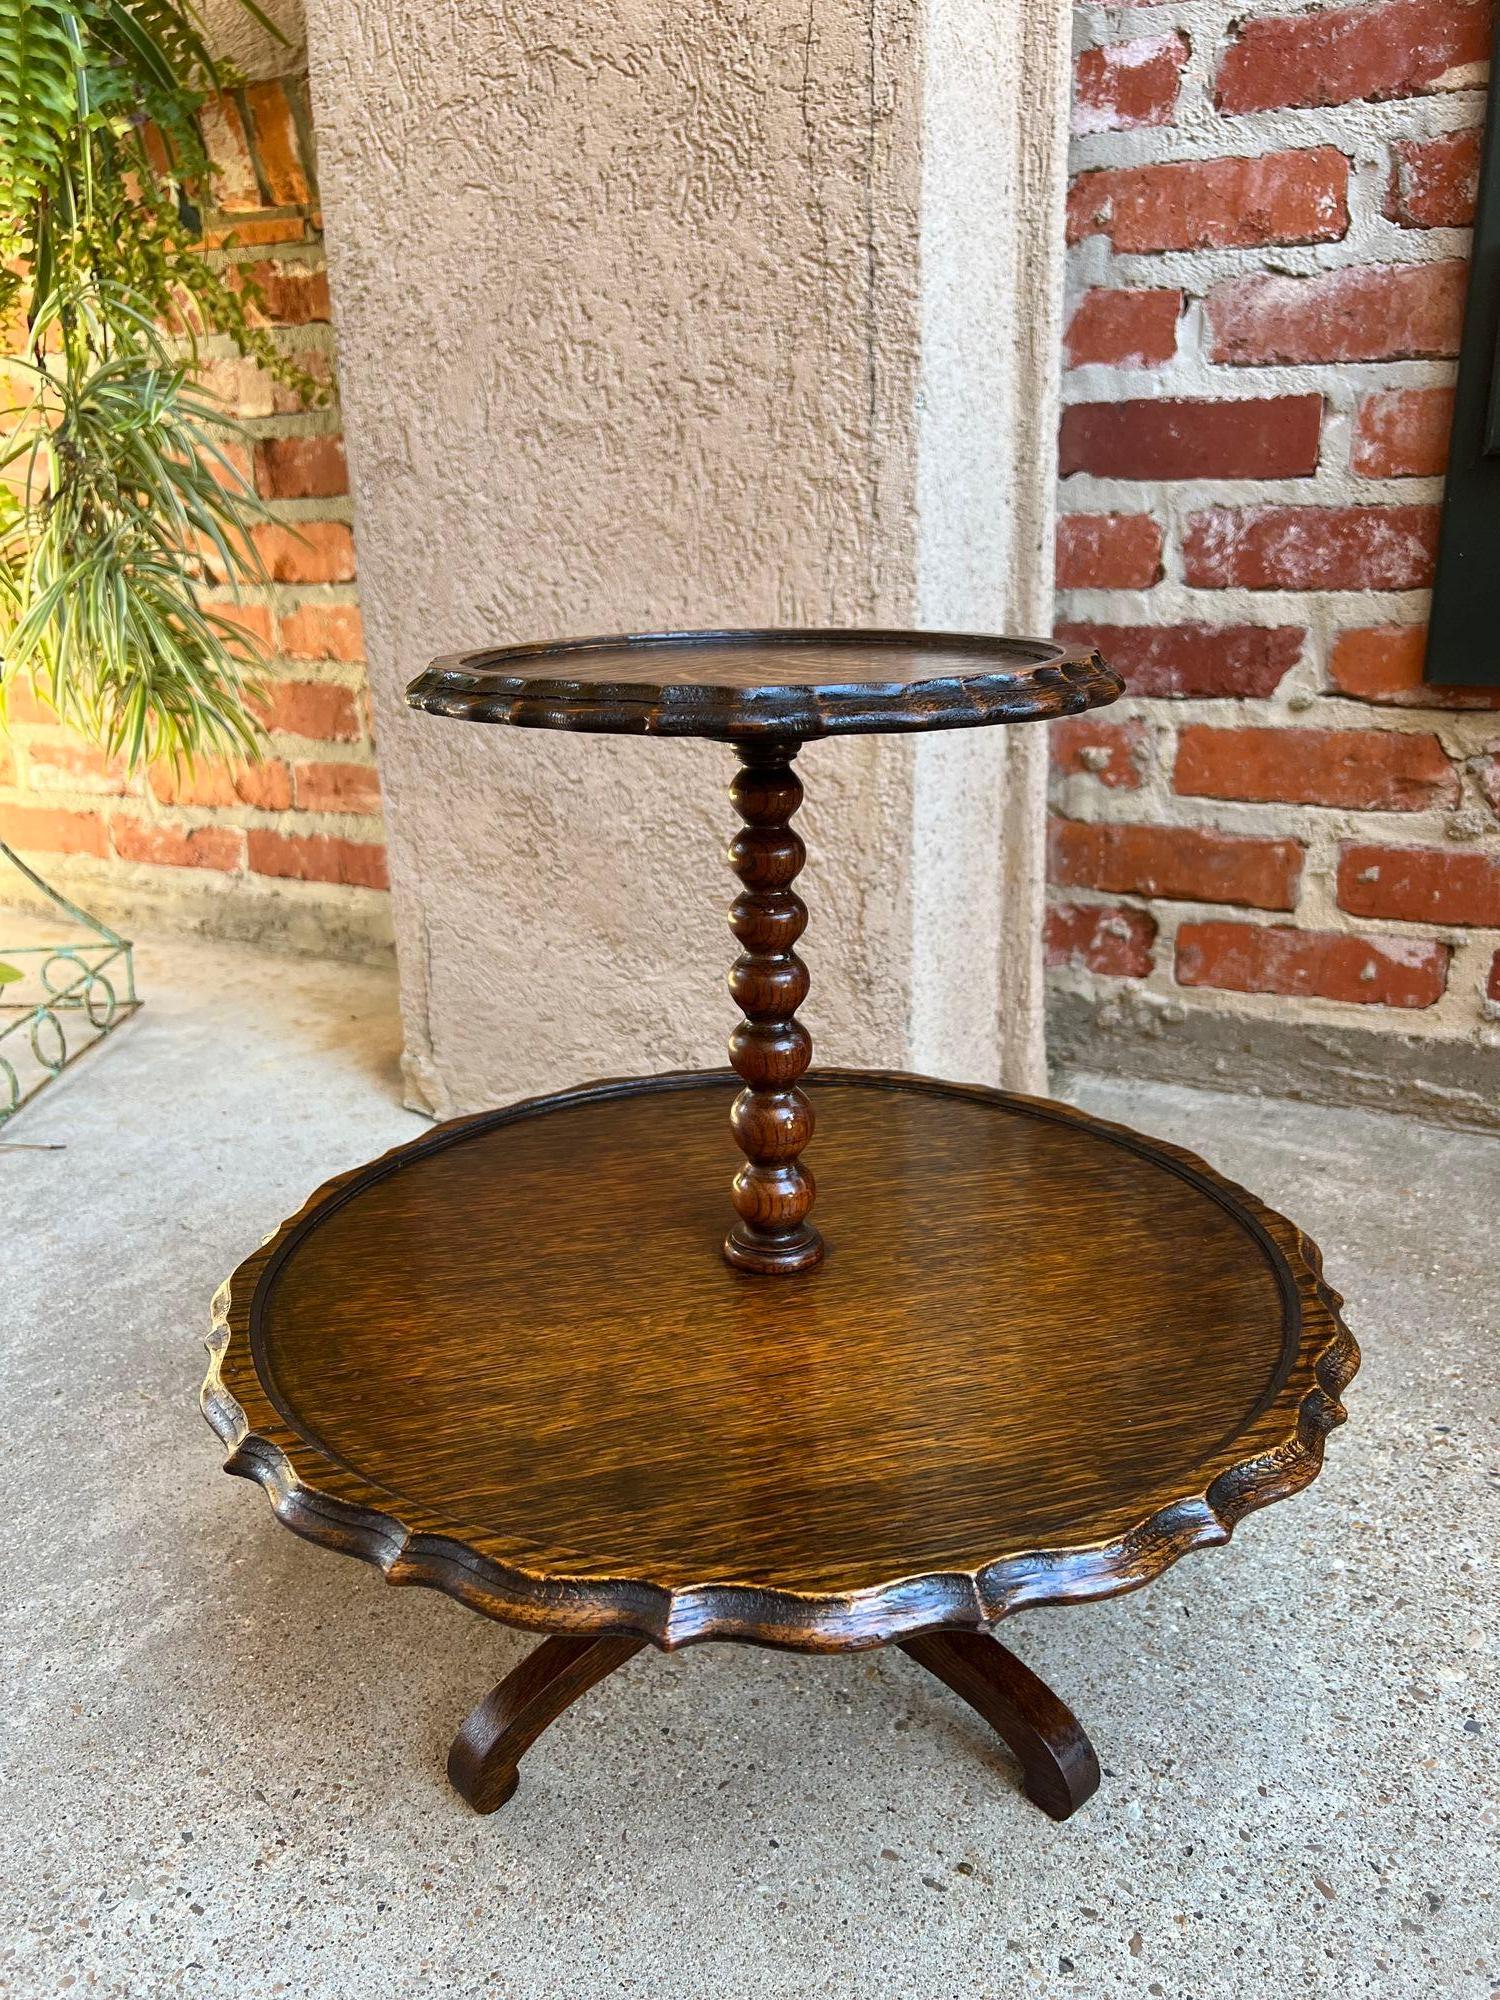 Antique English Revolving Dessert Server Cookie Muffin Display Tea Stand.

 Direct from England, a fabulous antique “muffin” or dessert server!
Classic British style, with two shelves, both having scalloped “pie crust” edges.  Traditional “bobbin”